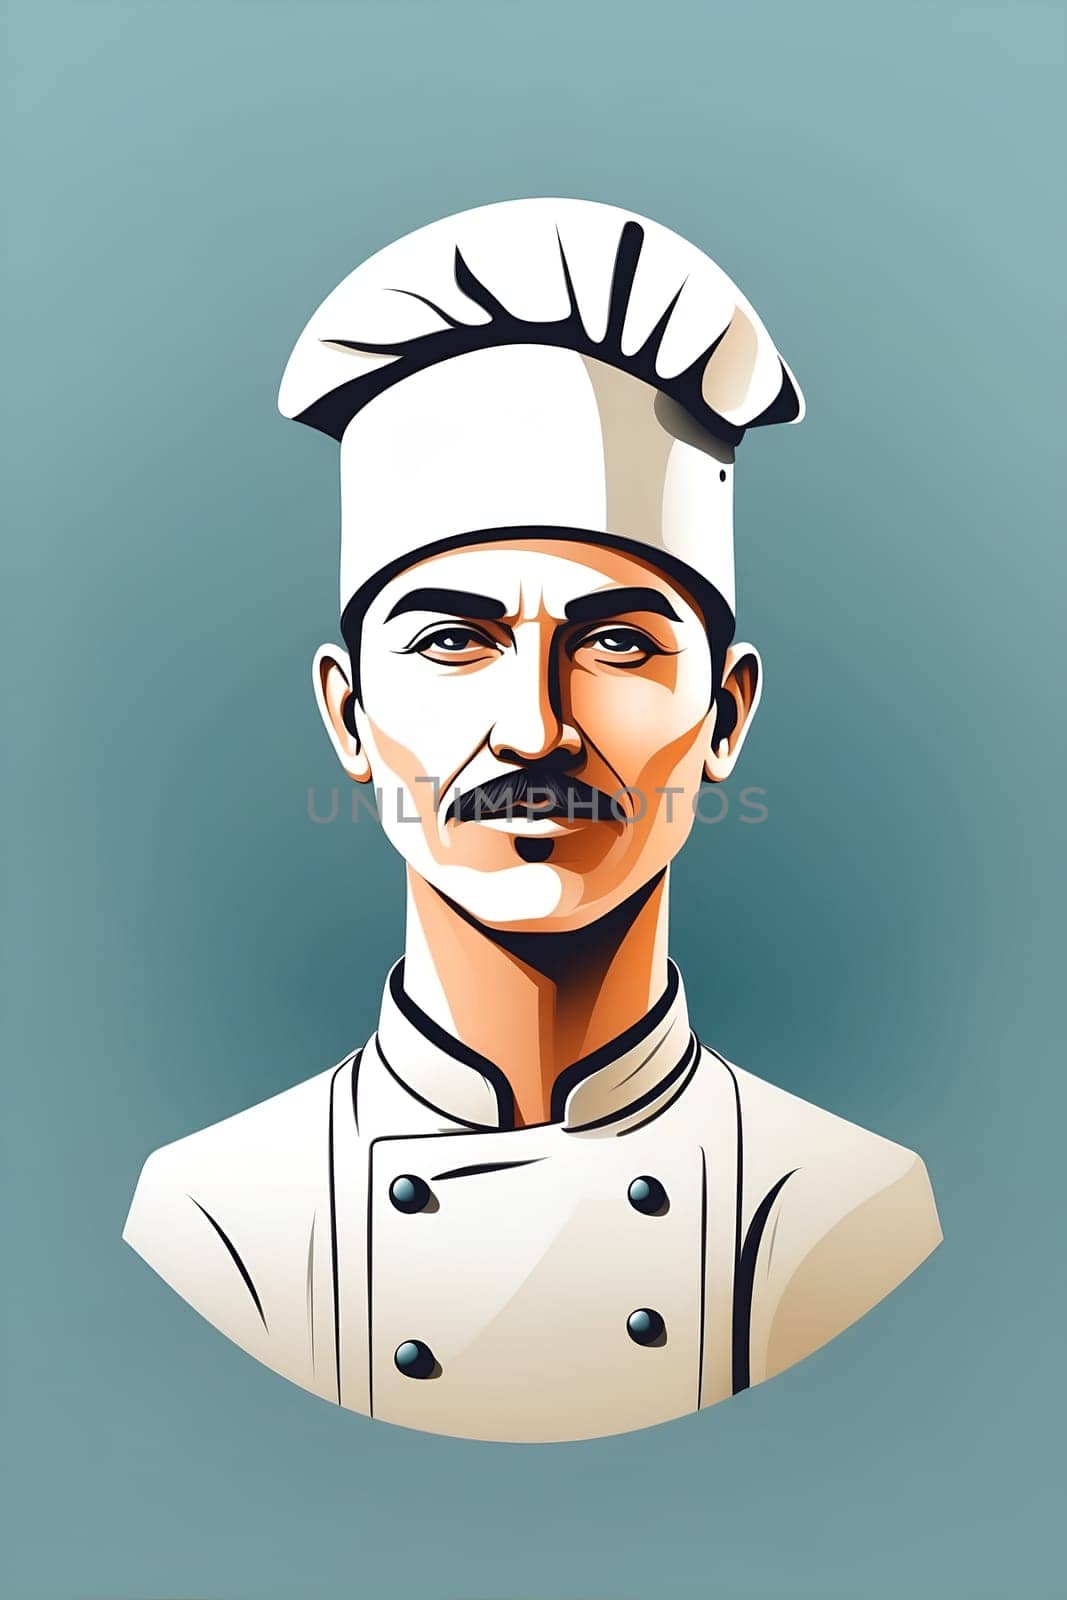 A striking digital painting of a man wearing a classic chefs hat, showcasing his culinary expertise.